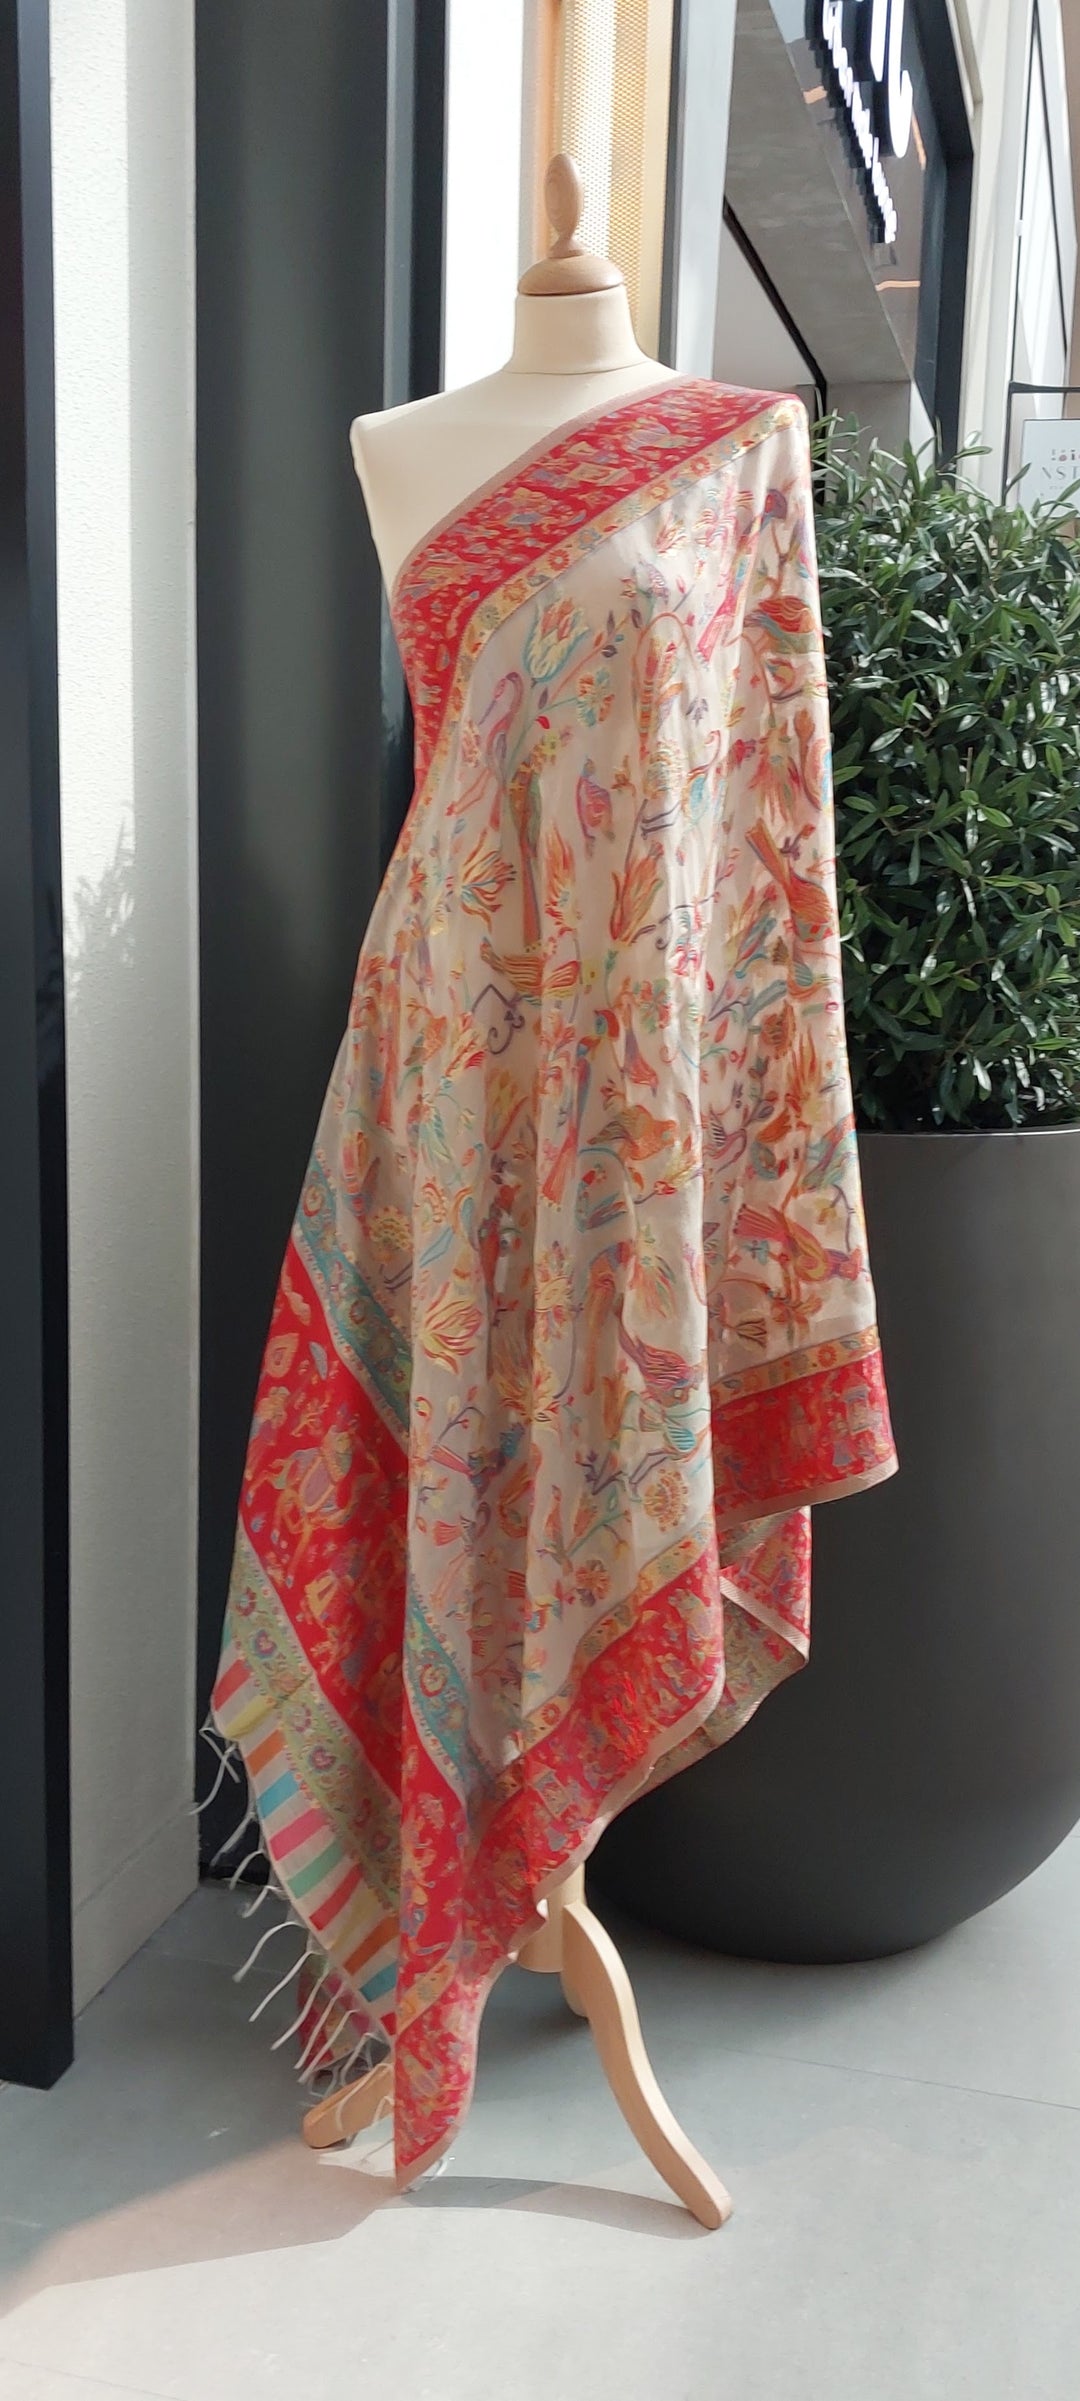 The "Archana" Cream and Red Kattan Silk Dupatta with Vibrant Birds and Animals on the Border (NEW)